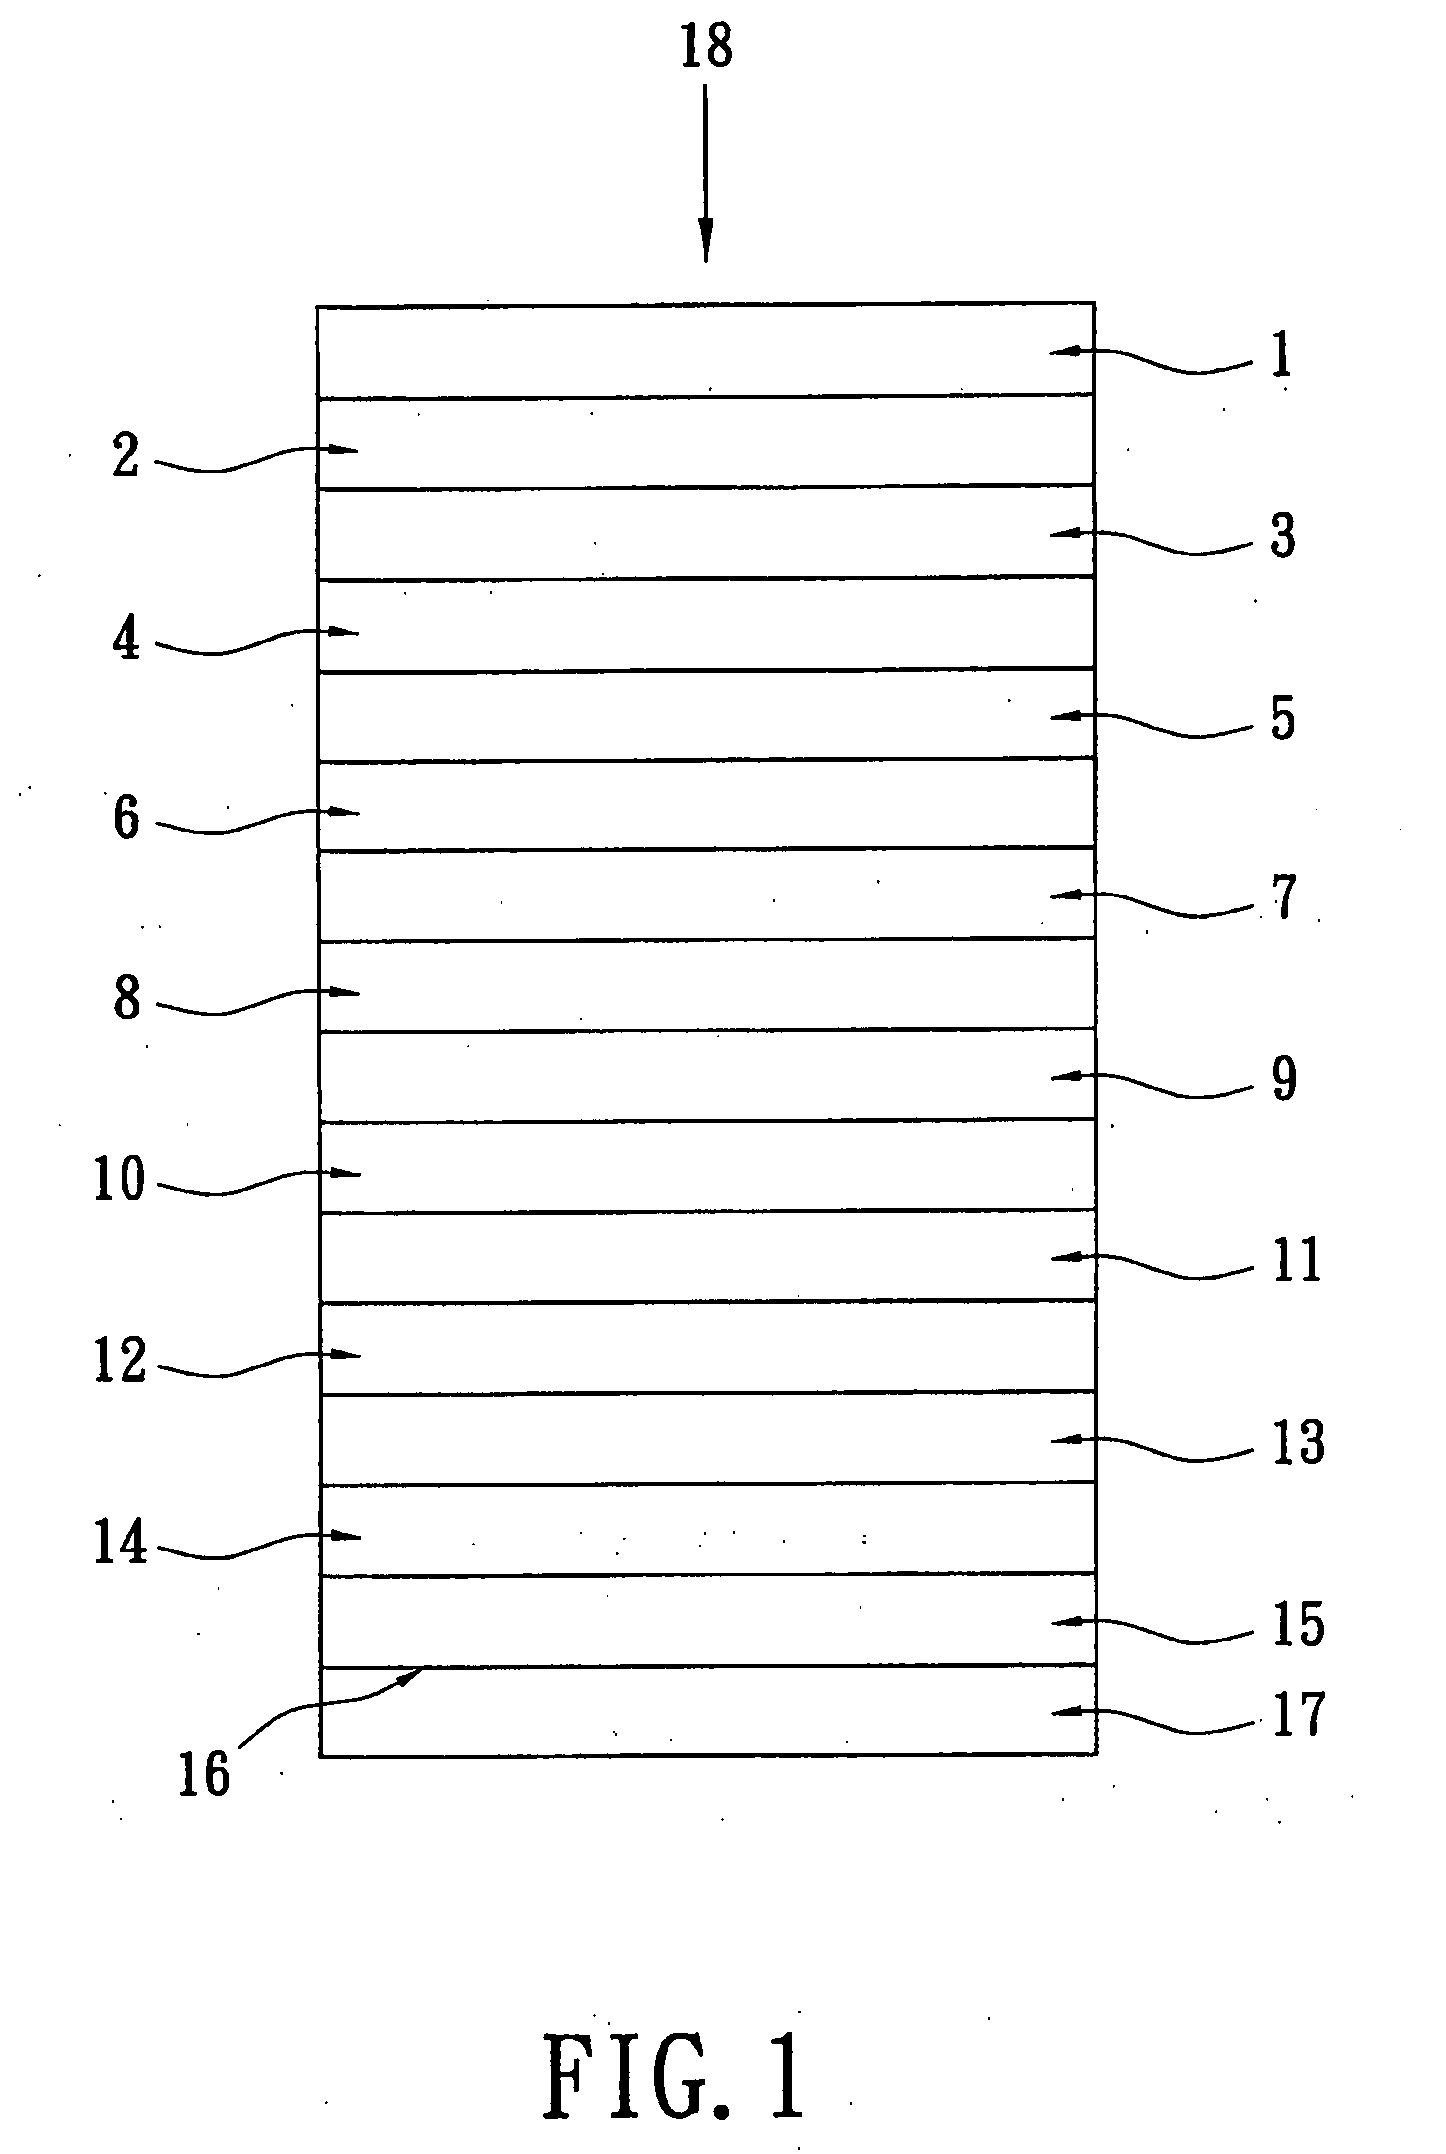 Anti-reflection coating with low resistivity function and transparent conductive coating as outermost layer